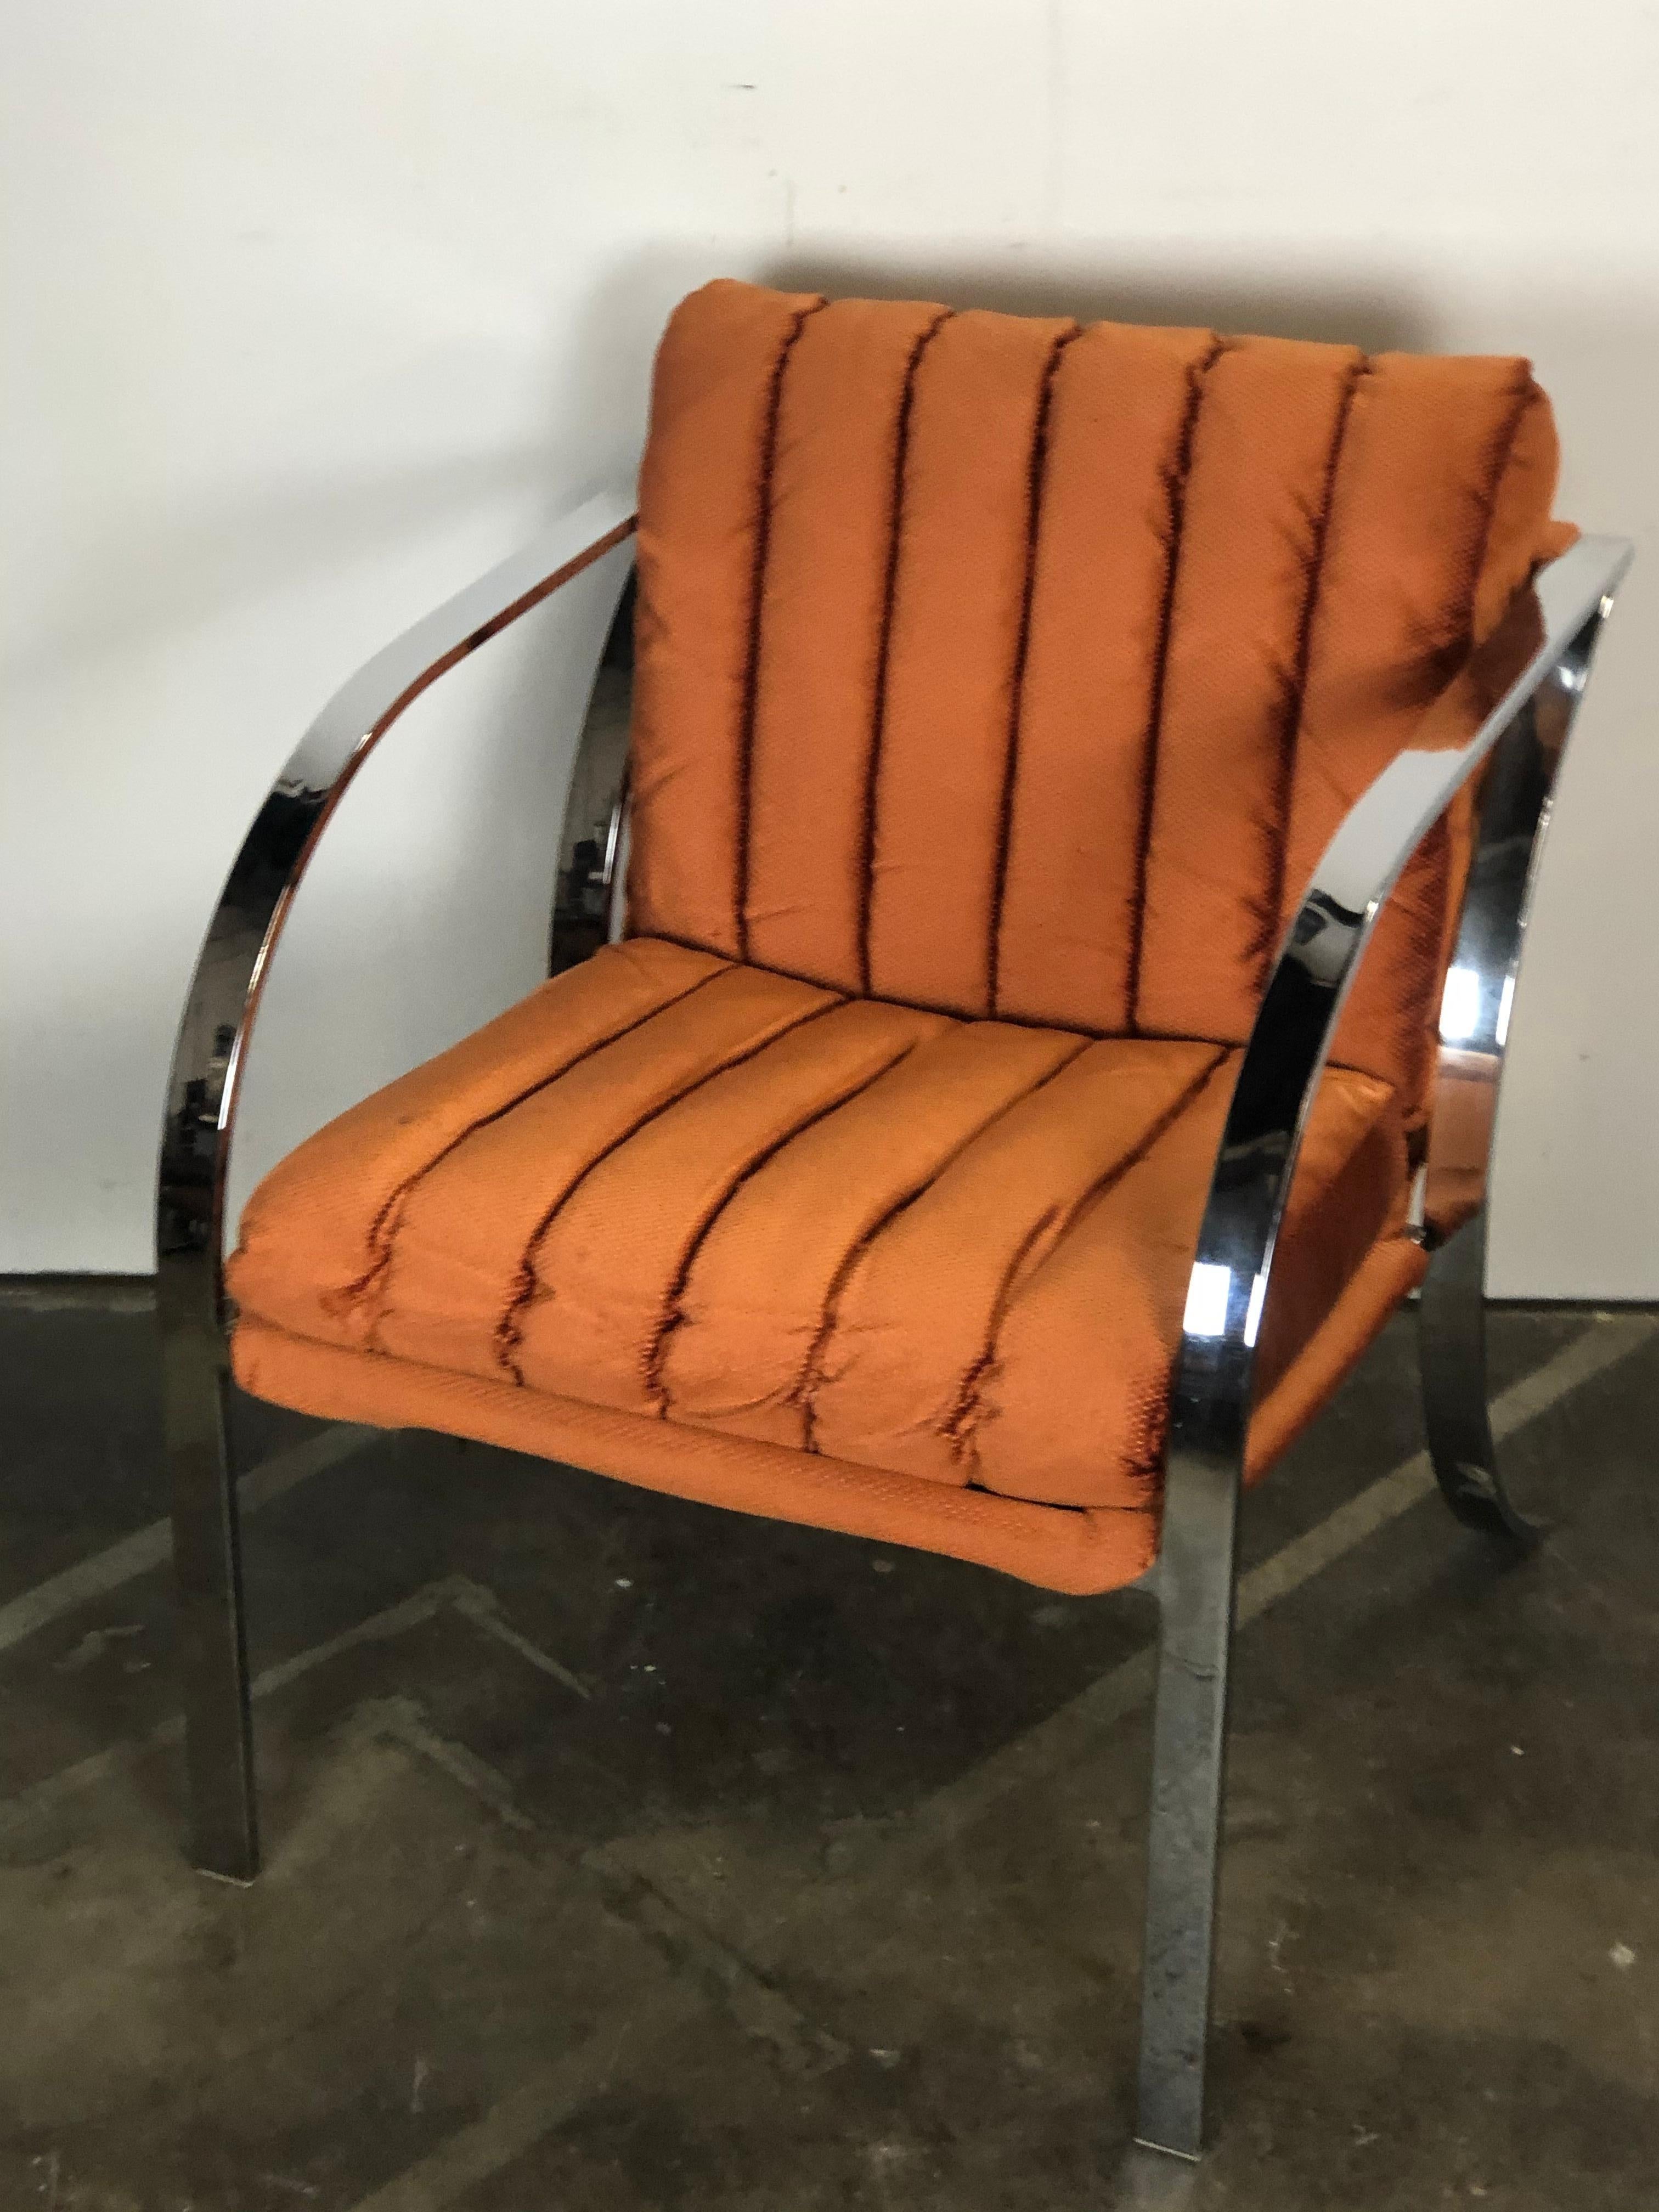 Swanky and cool Weiman/Warren Lloyd lounge chair with chrome frame and sexy lines. Original orange textile is extremely soft and shimmers. In good vintage condition. Very comfortable seat and back.